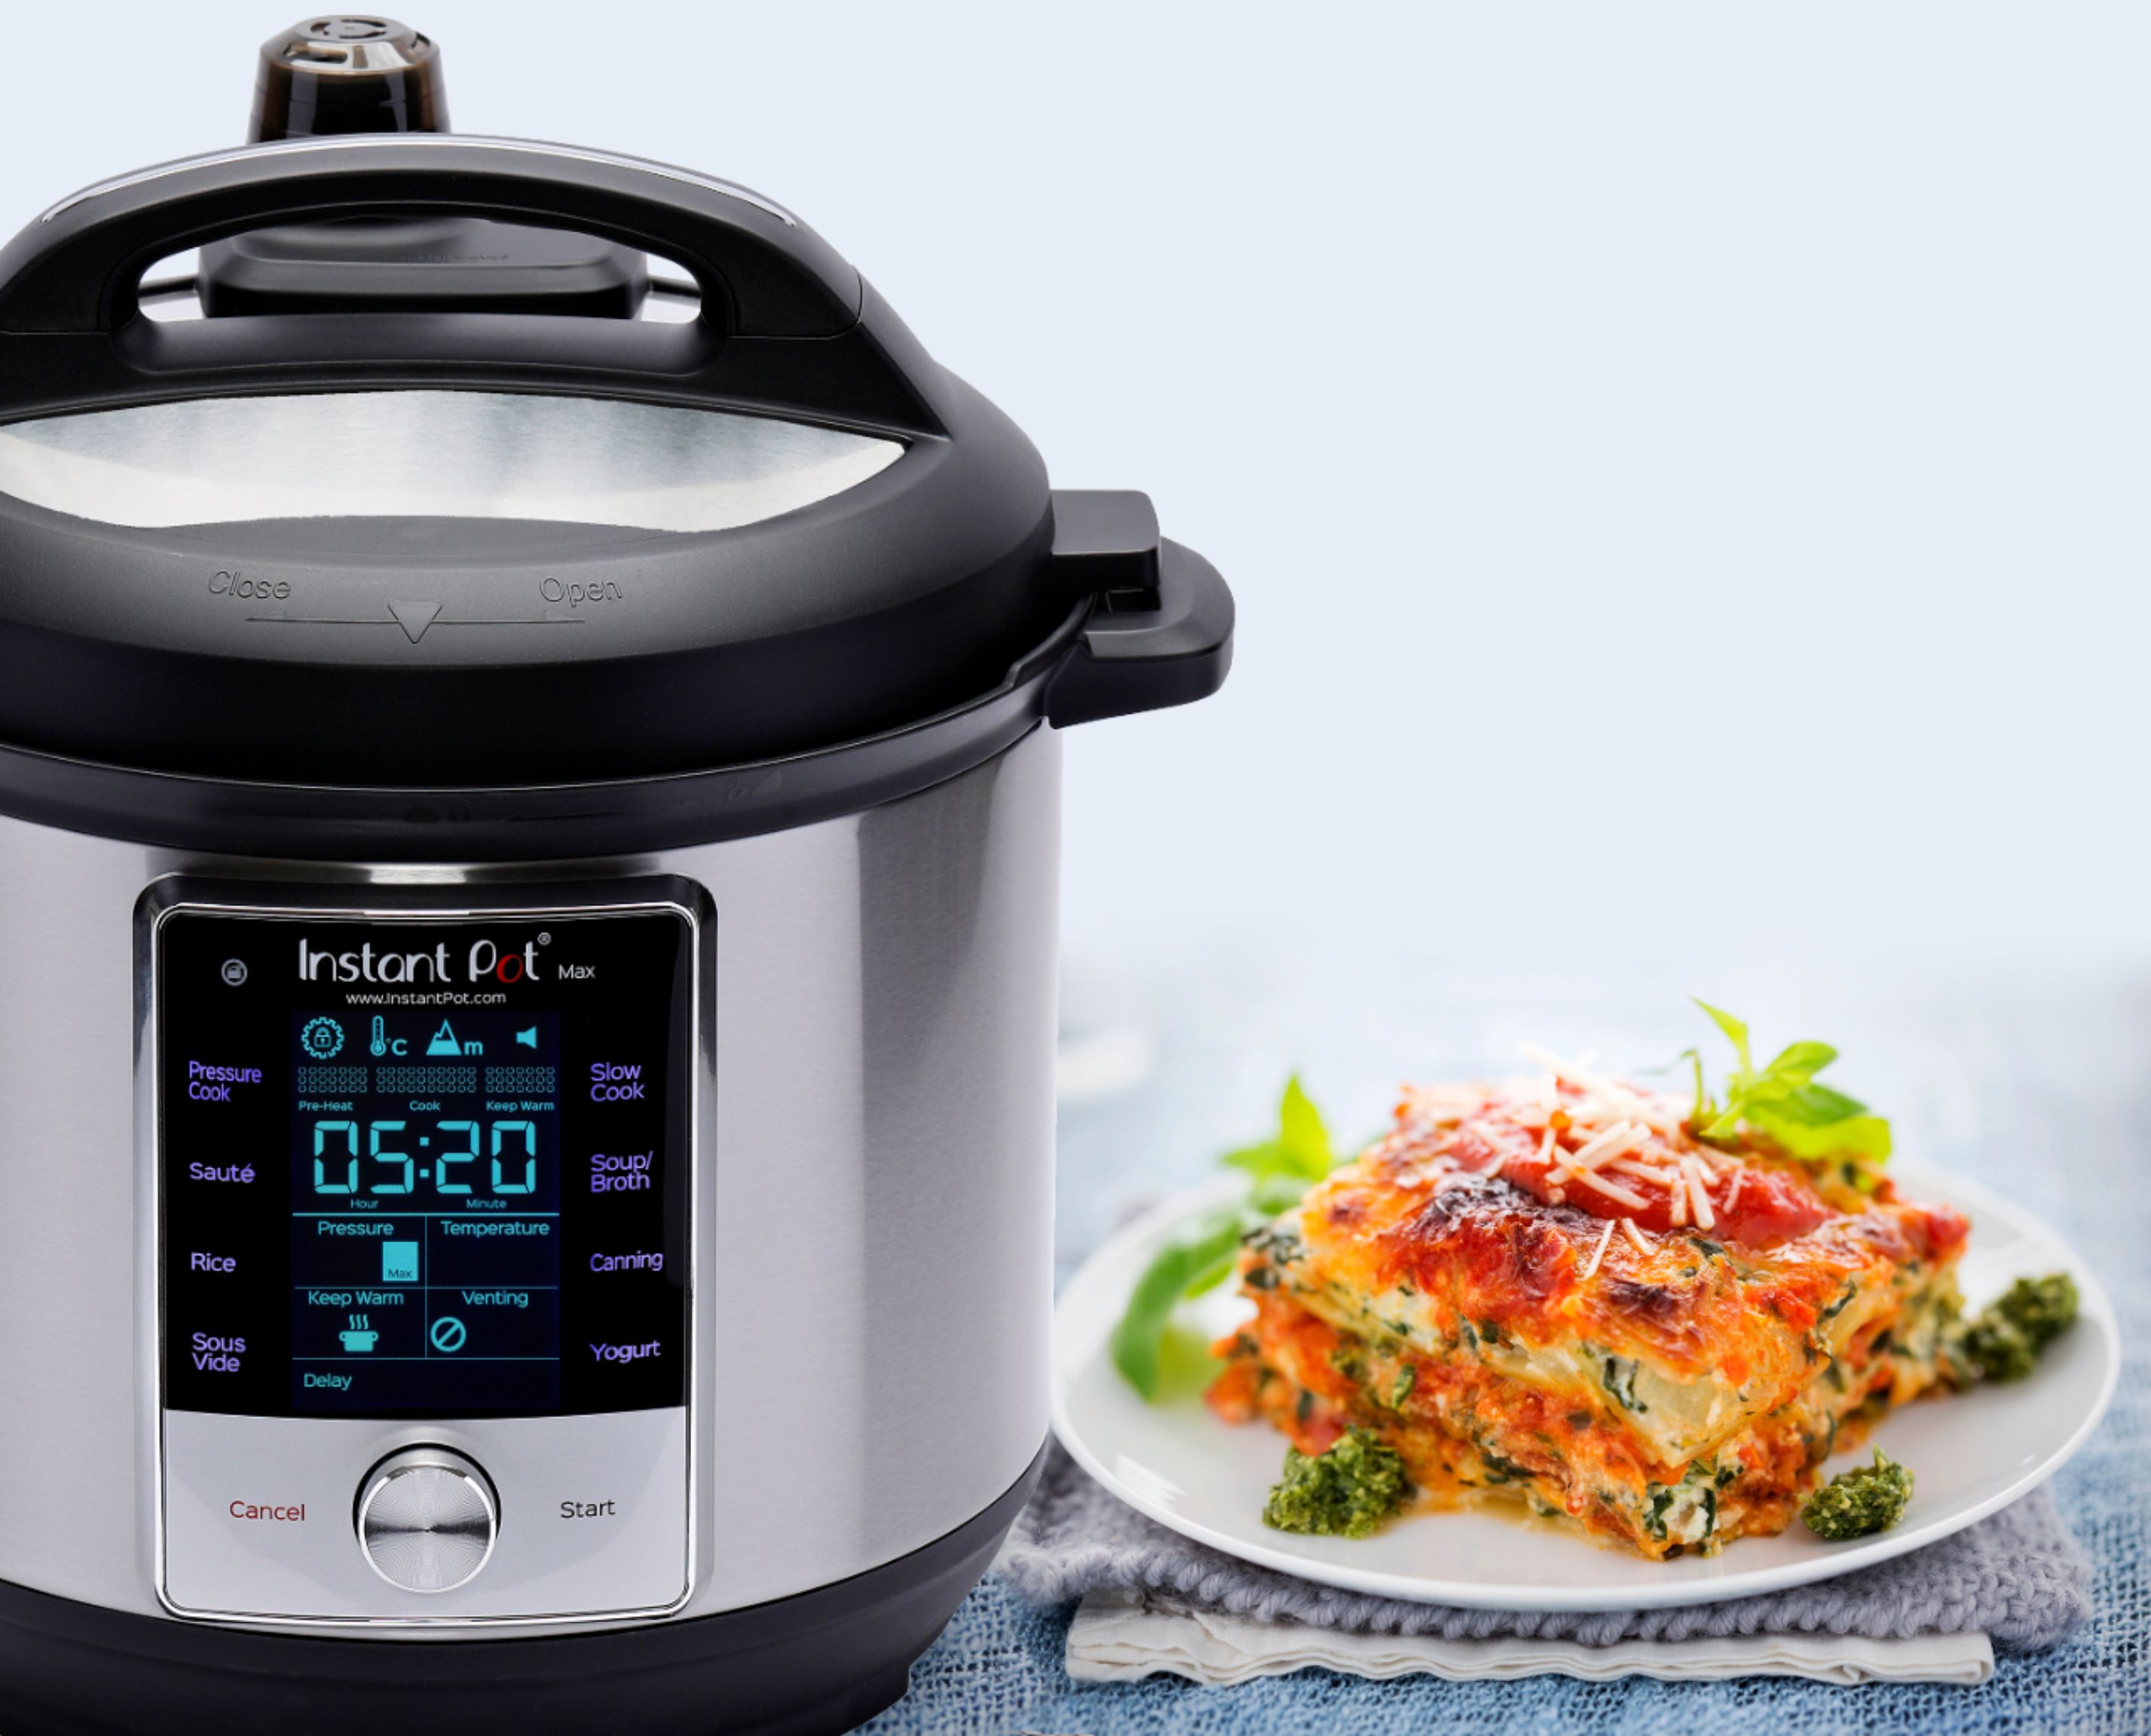 Instant Pot 6 qt. Duo Plus Stainless Steel Electric Pressure Cooker  112-0156-01 - The Home Depot